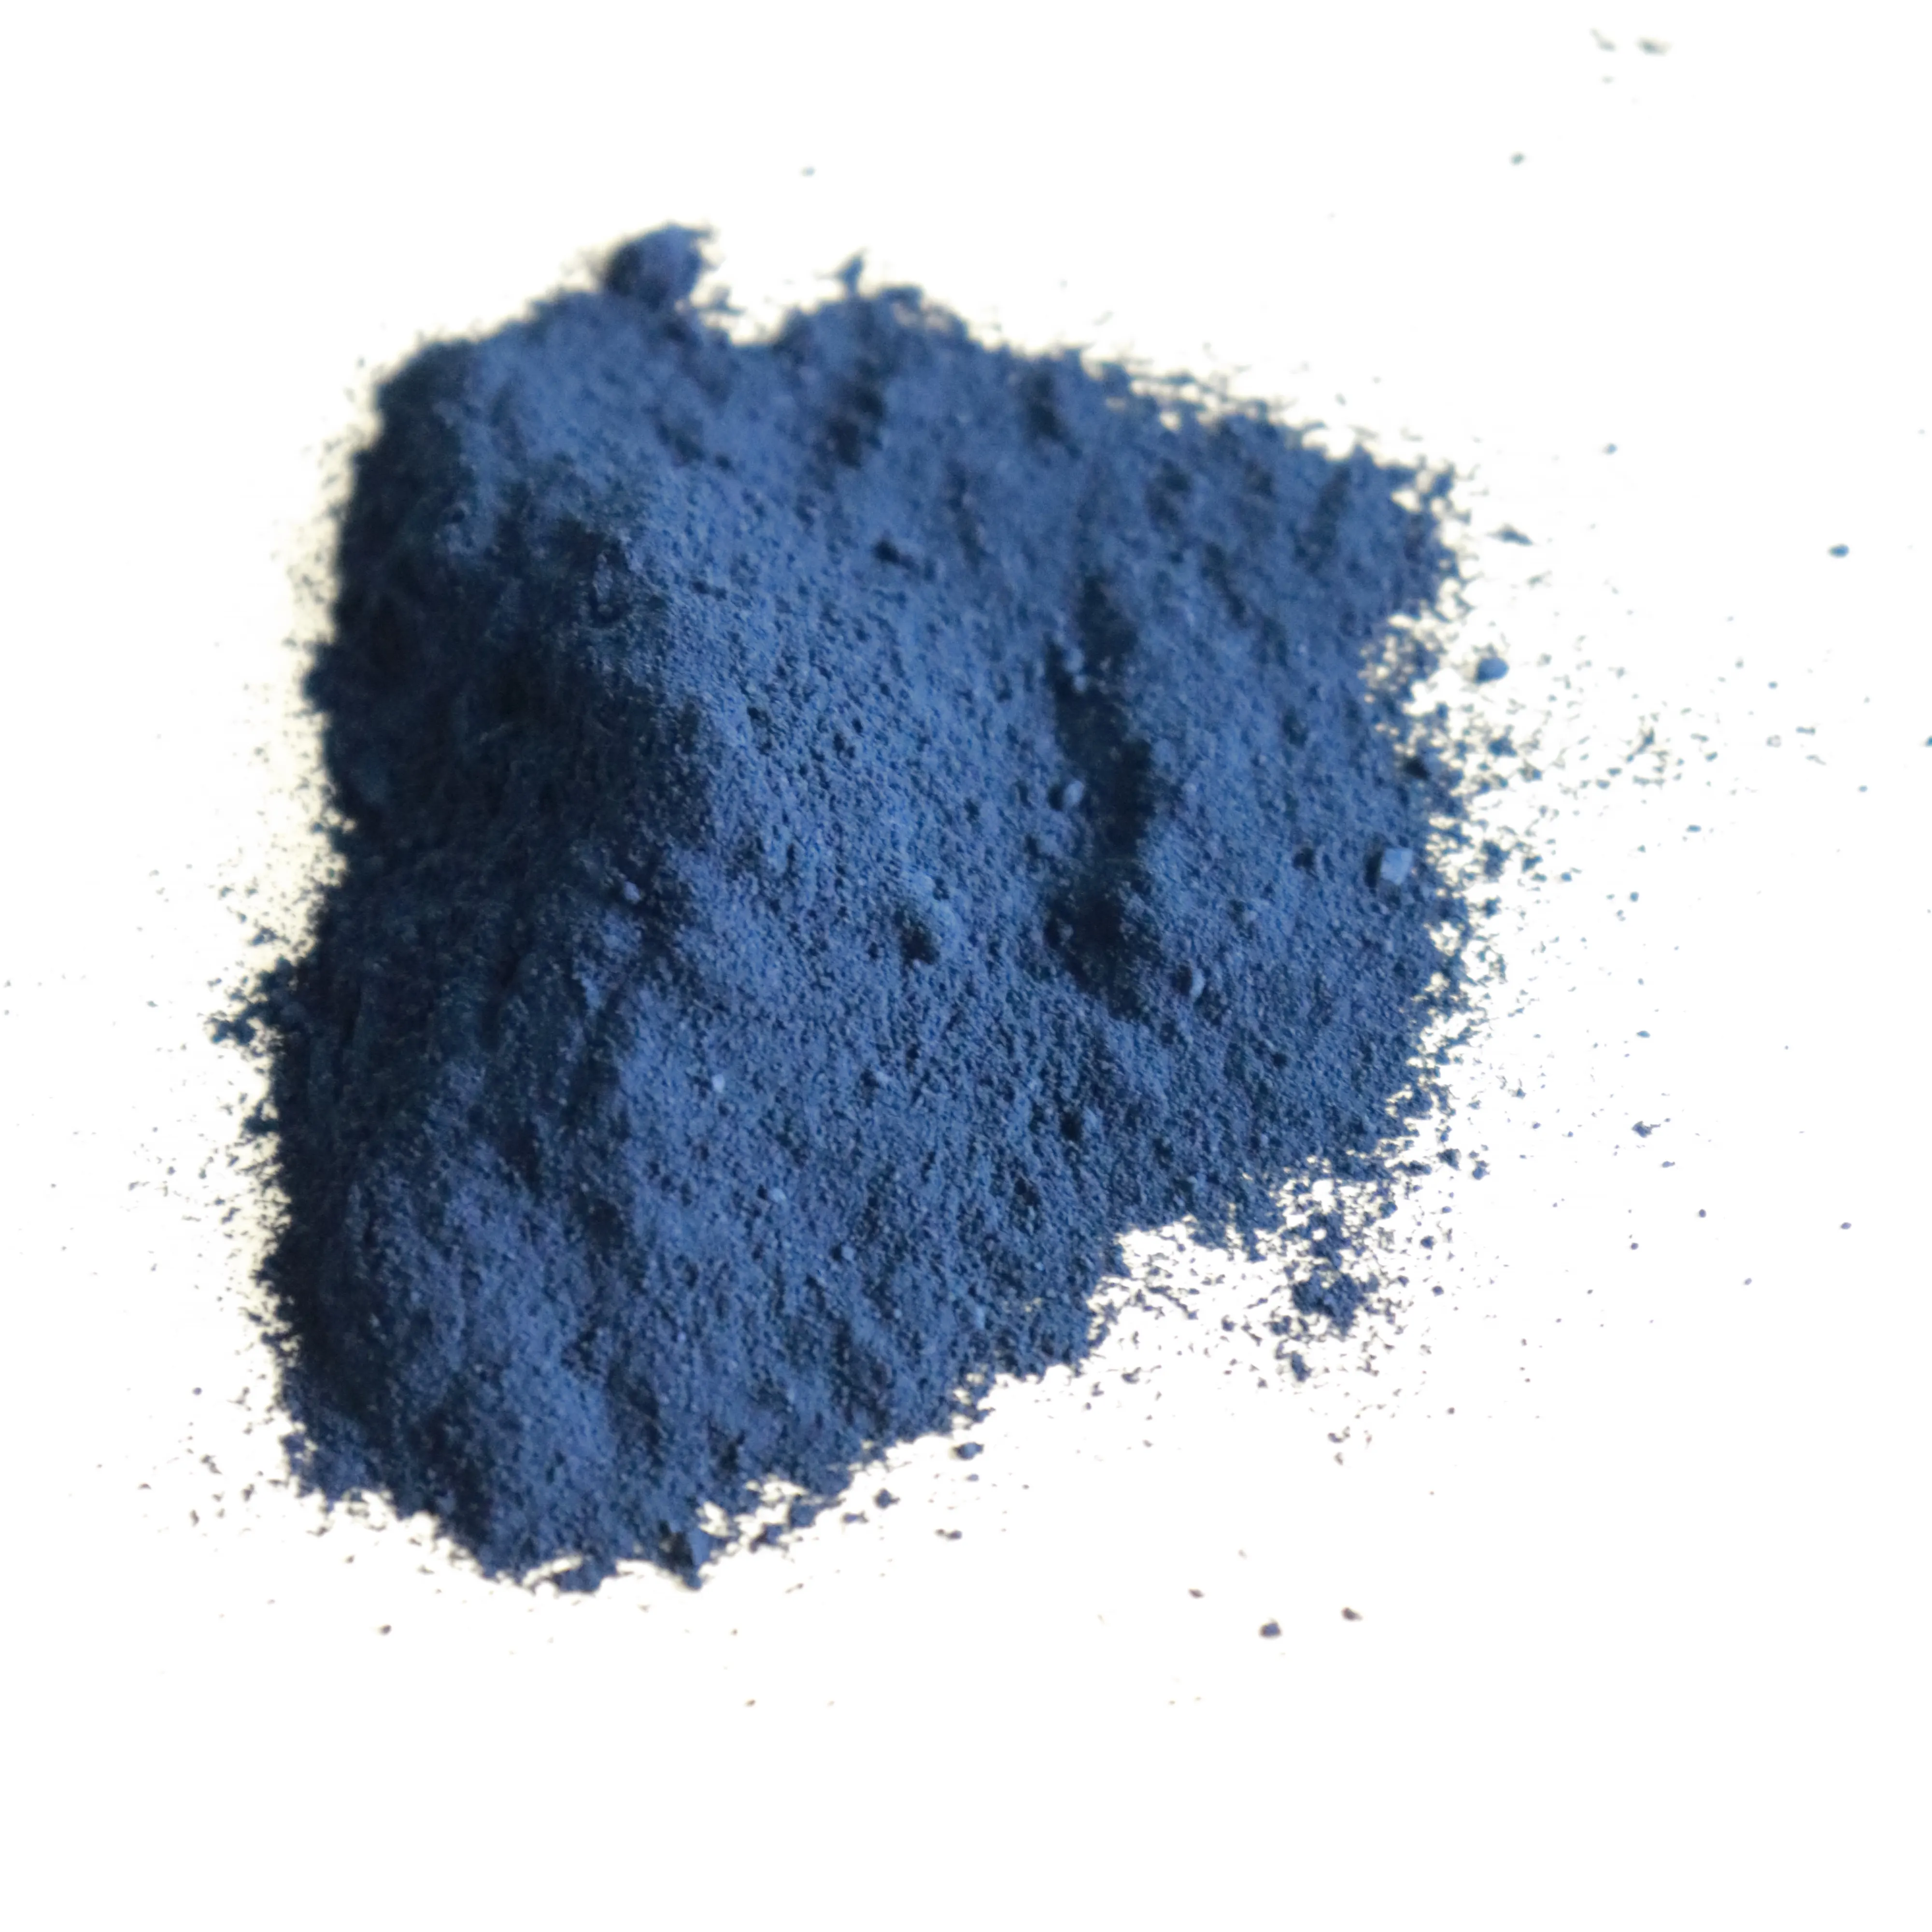 China Manufacturer Supply Navy Blue Disperse Dyes Product Textile Dyes Disperse Blue S-3BG 79 Dye